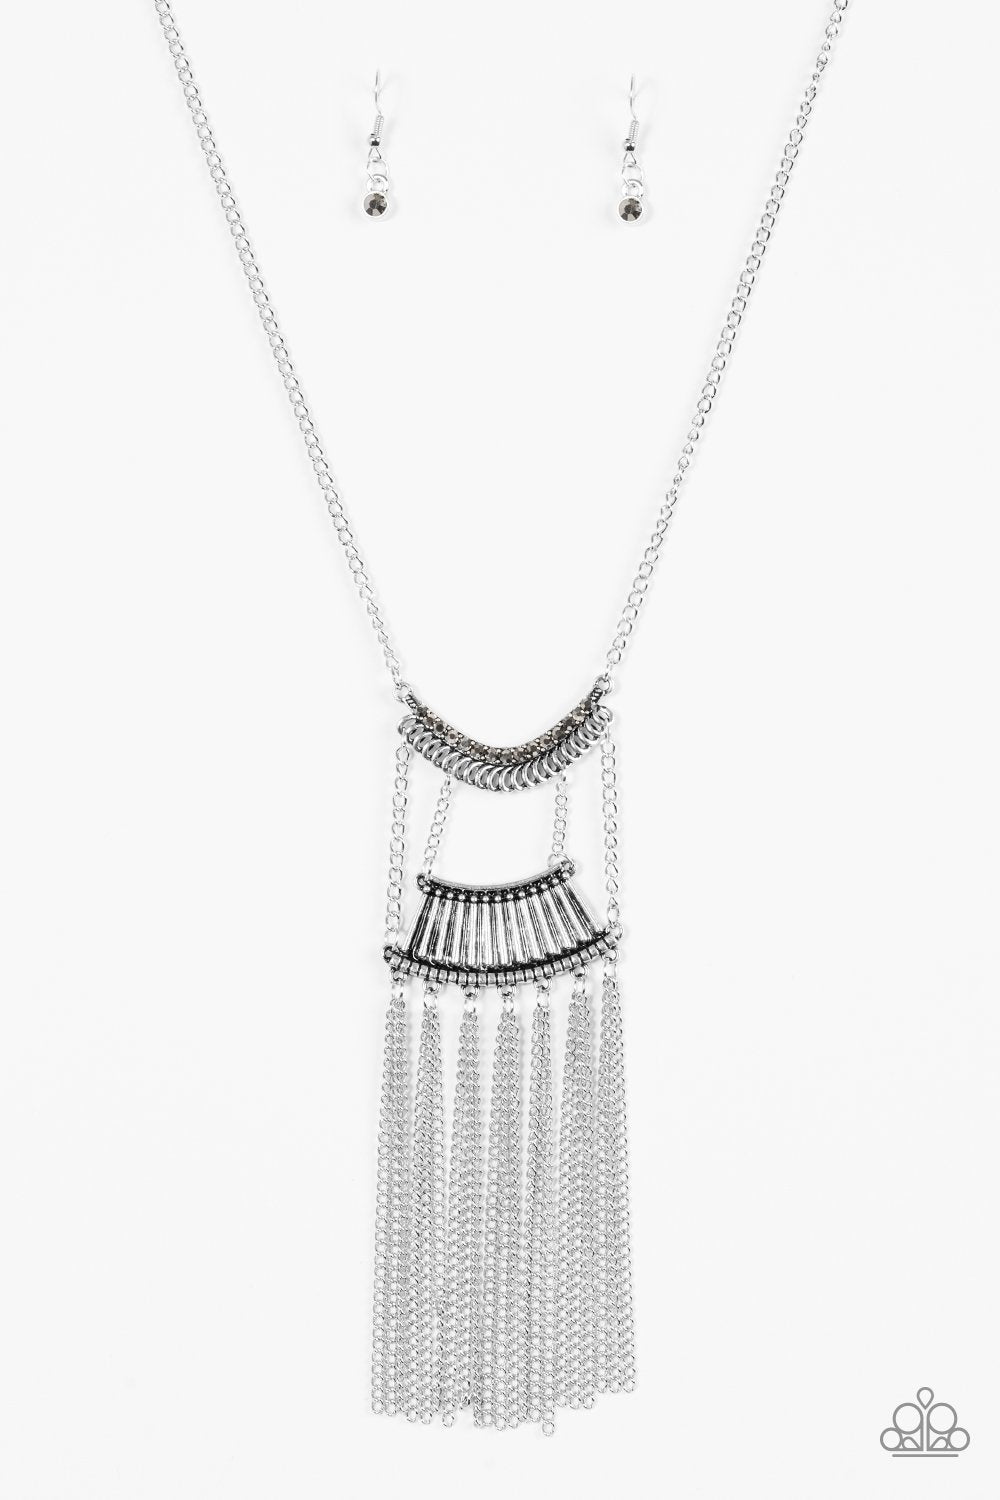 Glam Goddess Silver Necklace - Paparazzi Accessories-CarasShop.com - $5 Jewelry by Cara Jewels